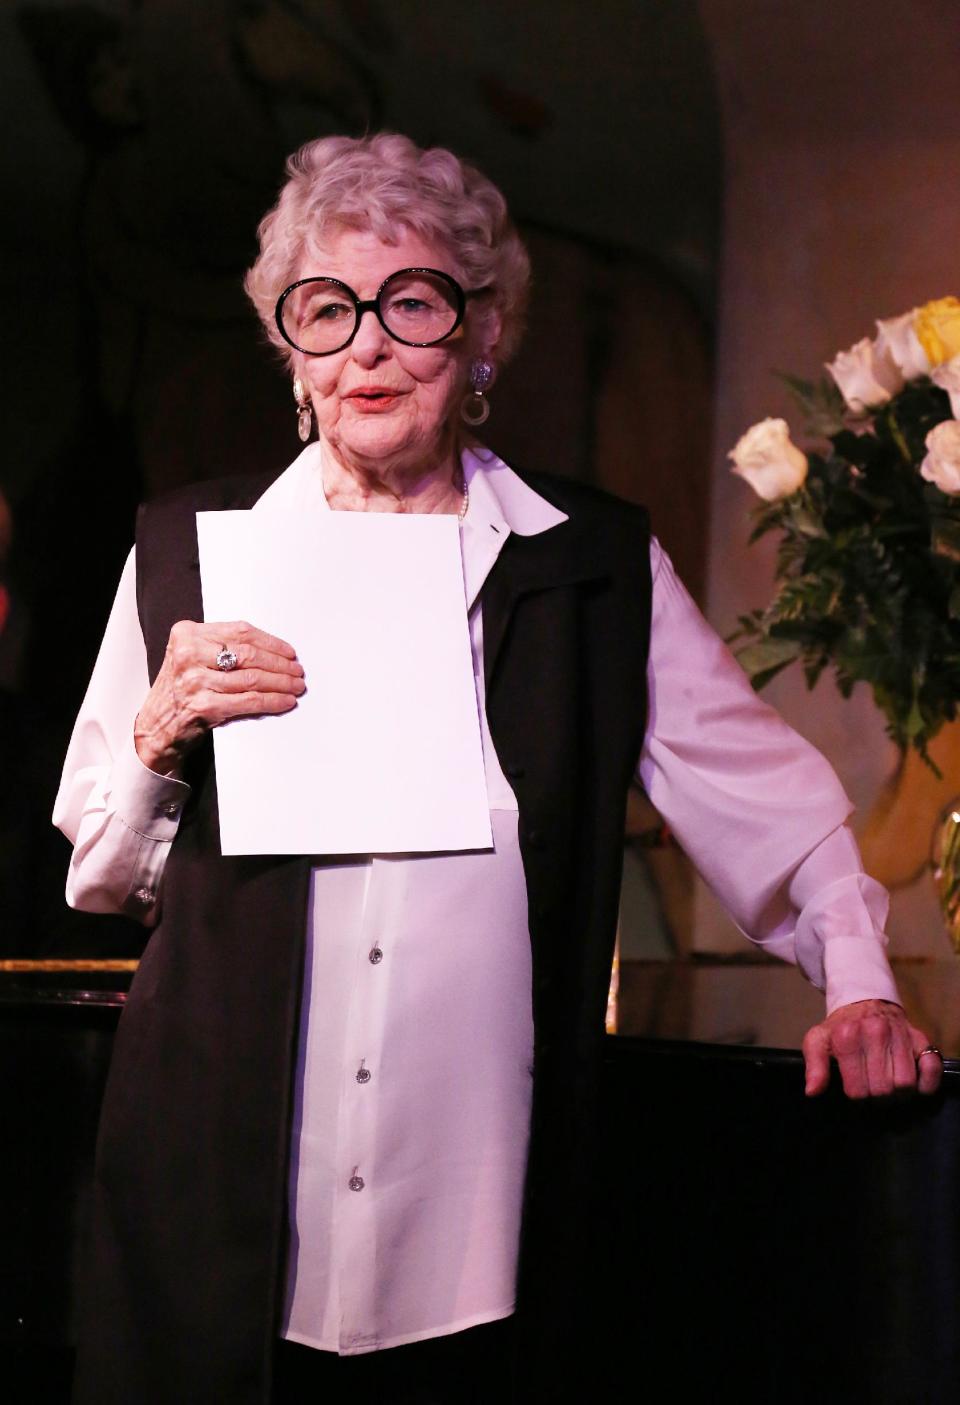 This April 2, 2013 image released by the O+M Company shows Elaine Stritch performing her final engagement at the Cafe Carlyle in New York. Stritch kicked off a final series of concerts to bid farewell to New York on Tuesday, refusing to be maudlin and instead weaving her typical brand of sass and feistiness. Stritch plans to retire to Birmingham, Mich. a suburb of Detroit, after seven decades in New York City. She ends her five-show farewell on Saturday.(AP Photo/The O+M Company, Walter McBride)